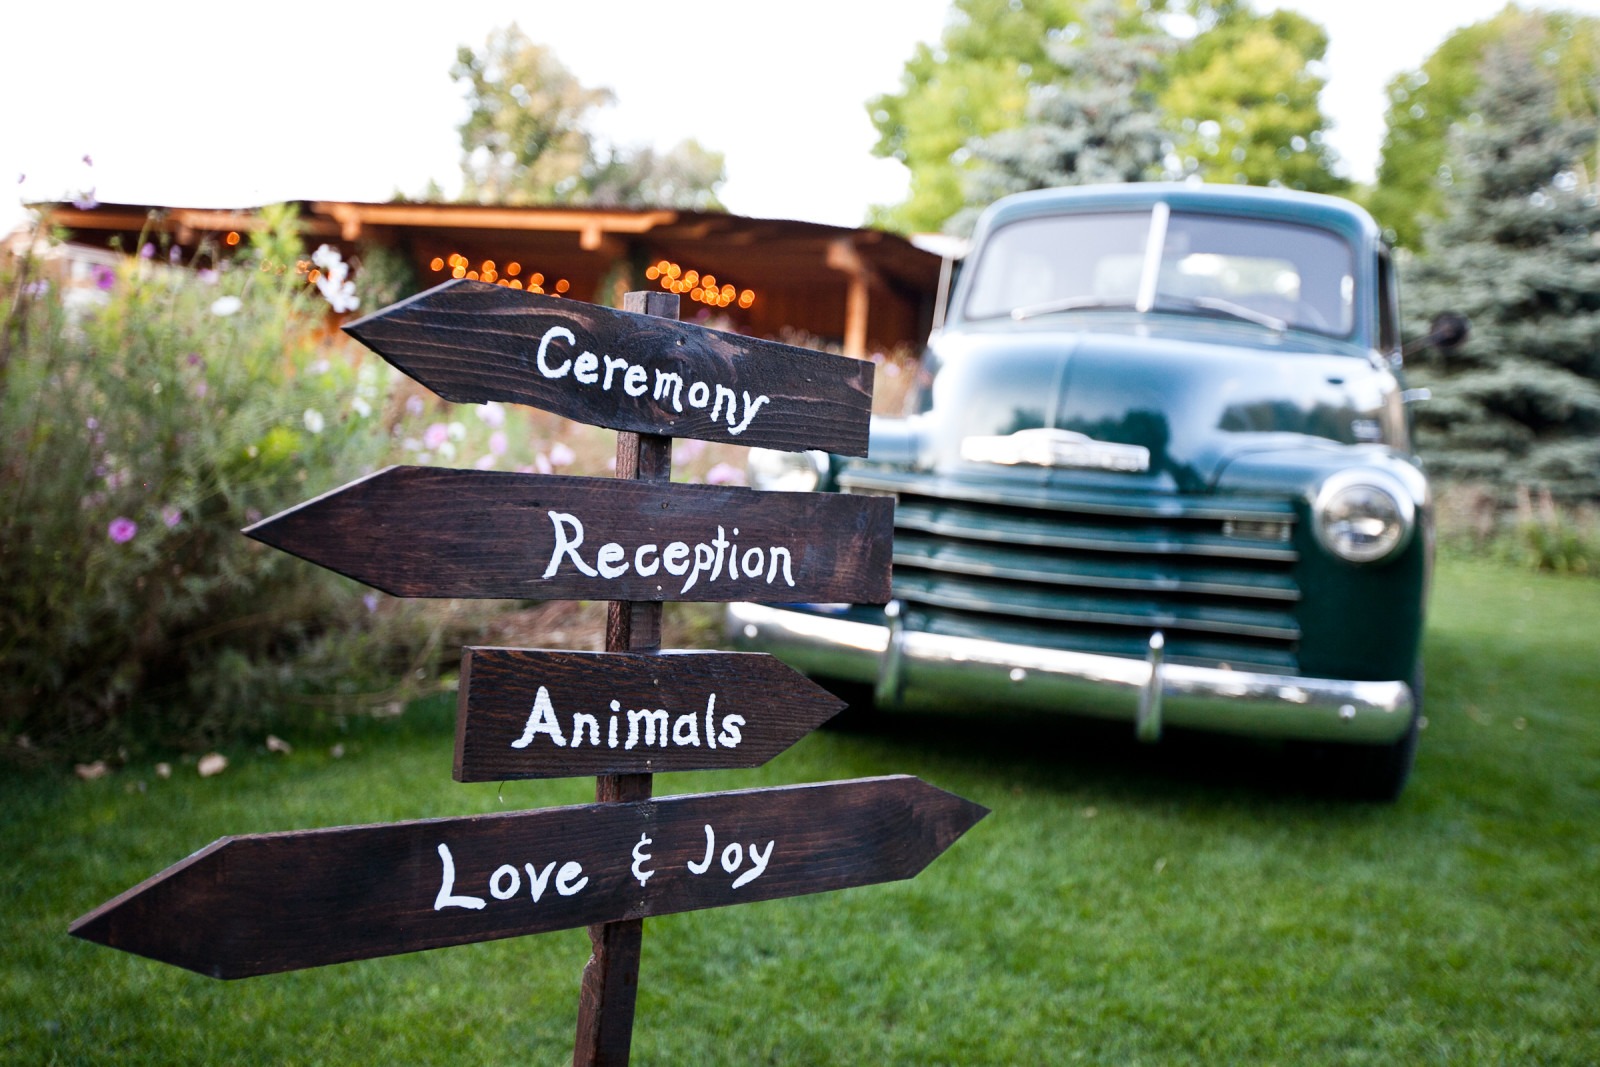 wooden sign with white words painted on it that say reception, animals, love&joy, ceremony in front of an old pick up truck